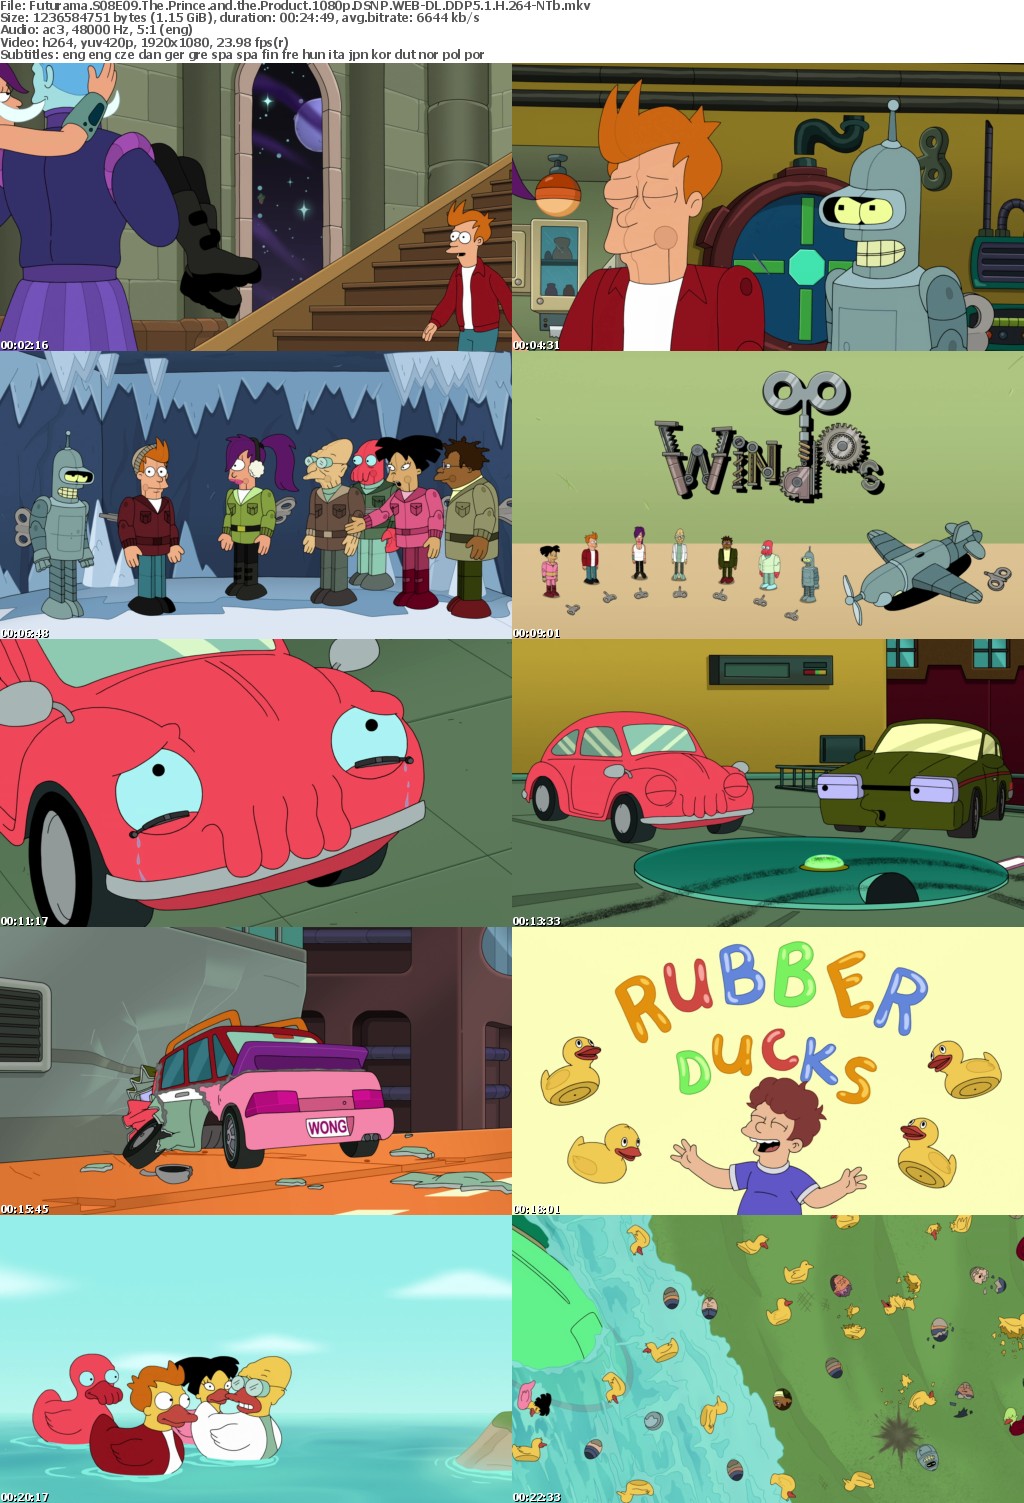 Futurama S08E09 The Prince and the Product 1080p DSNP WEB-DL DDP5 1 H 264-NTb